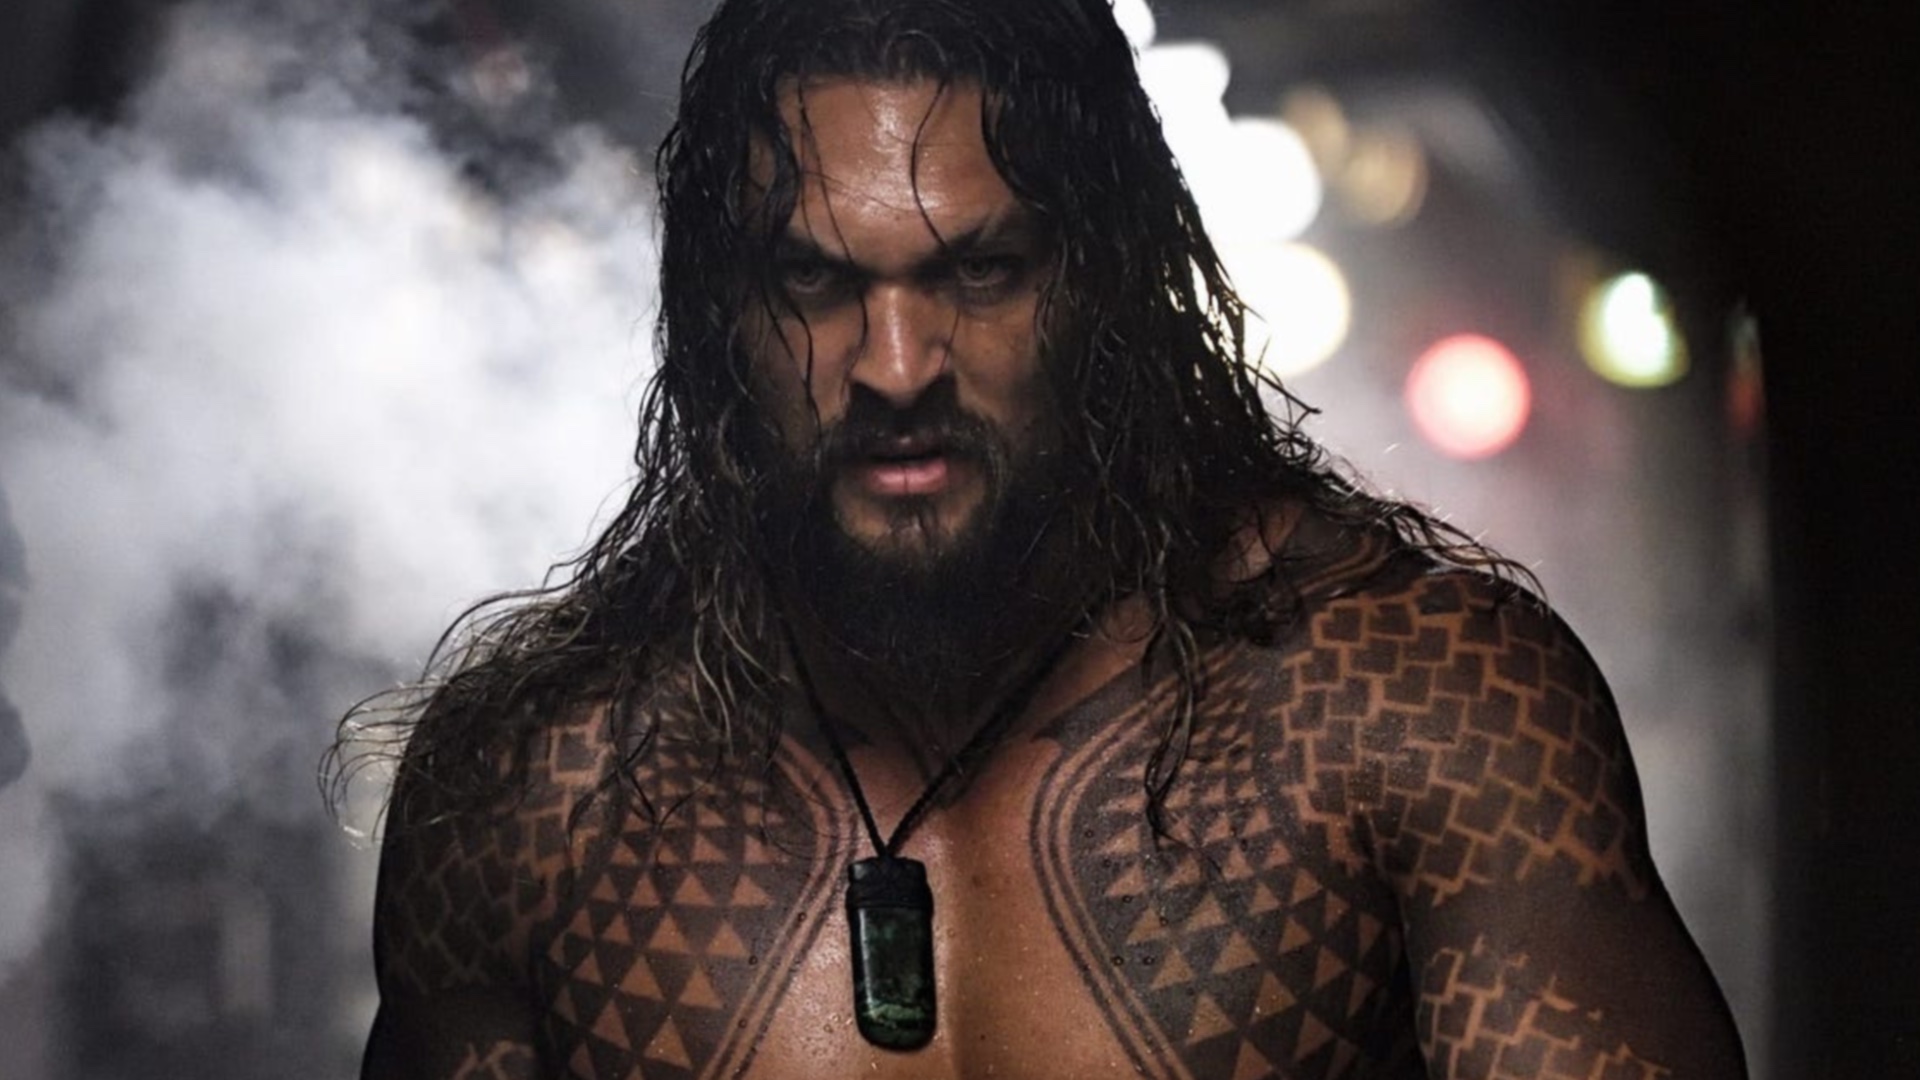 Aquaman director James Wan says new technology made filming the sequel less painful for actors